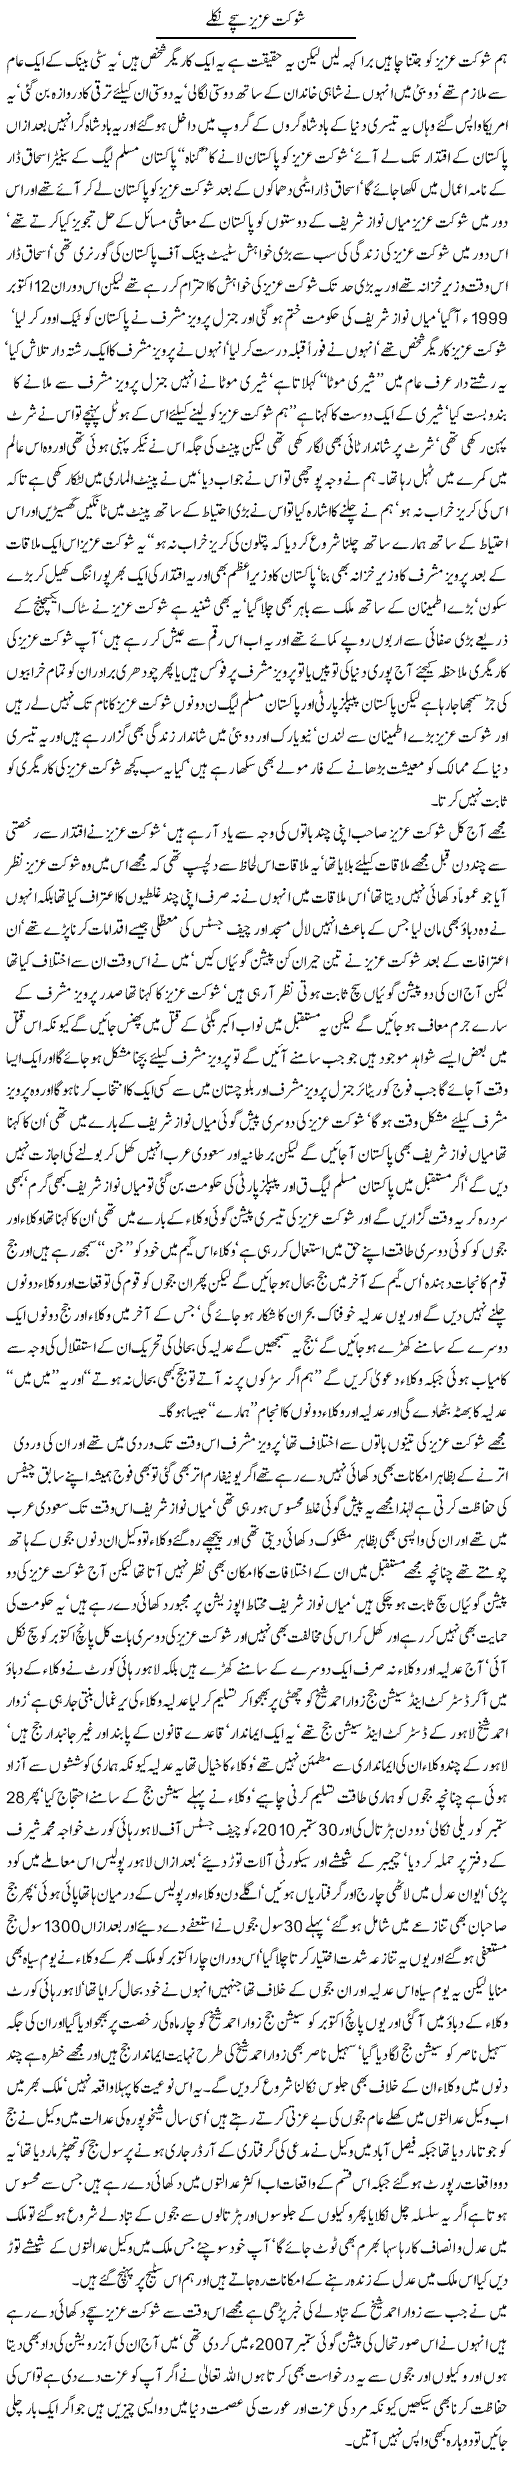 Shaukat Is True Express Column Javed Chaudhry 7 October 2010